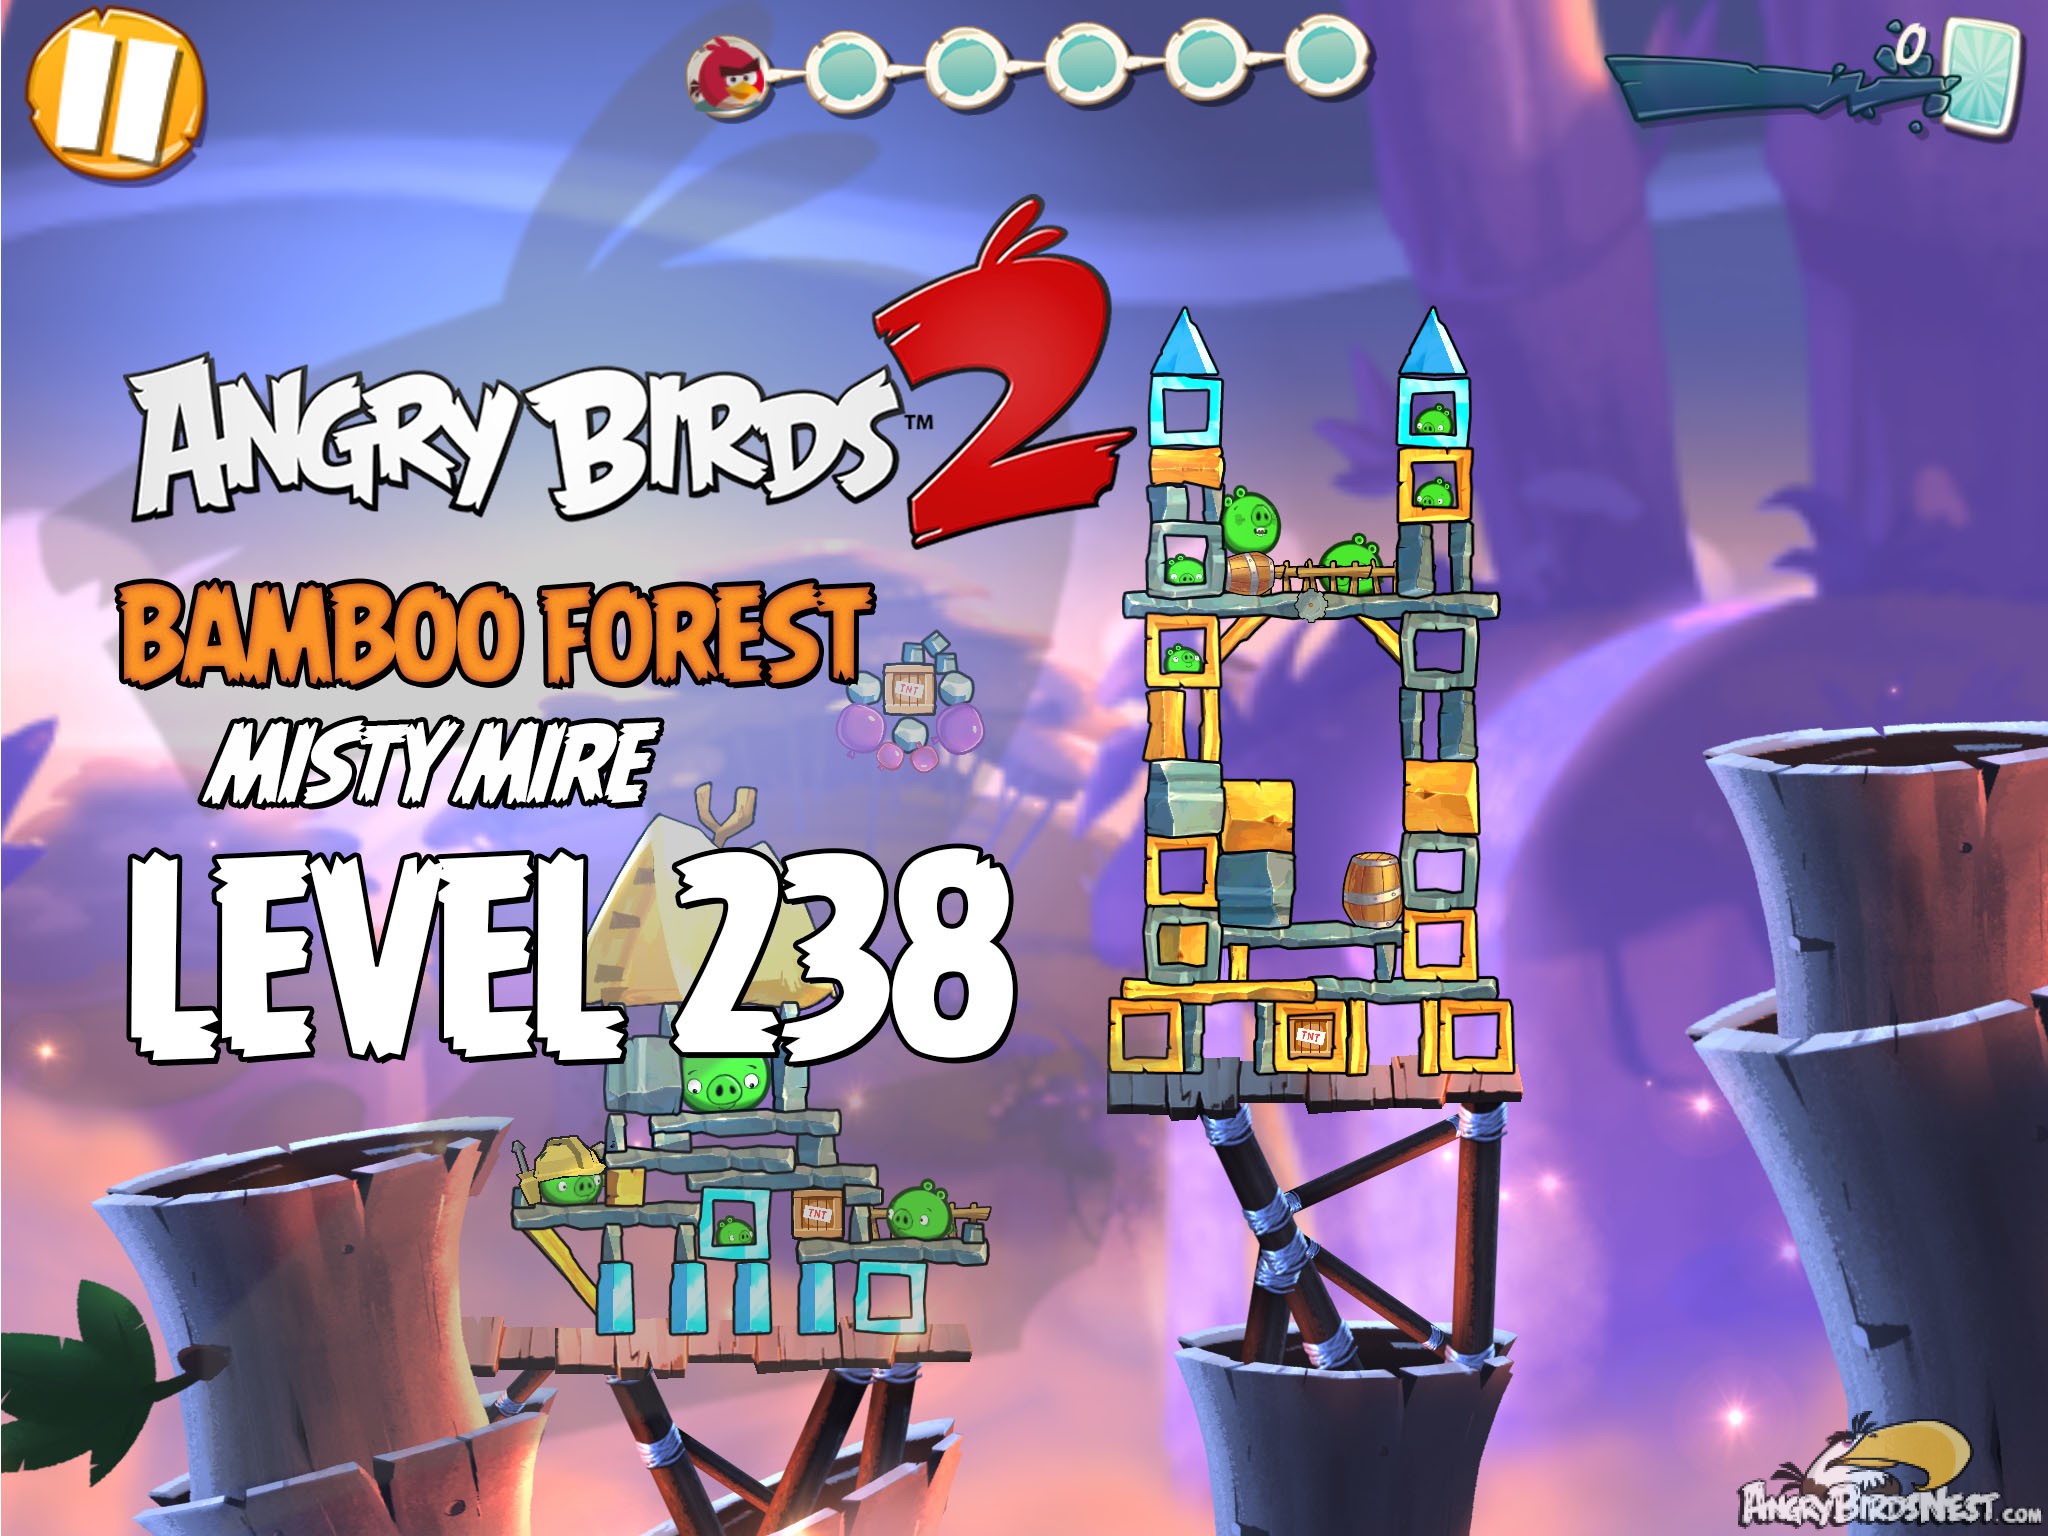 Angry Birds 2 Bamboo Forest Misty Mire Level 238